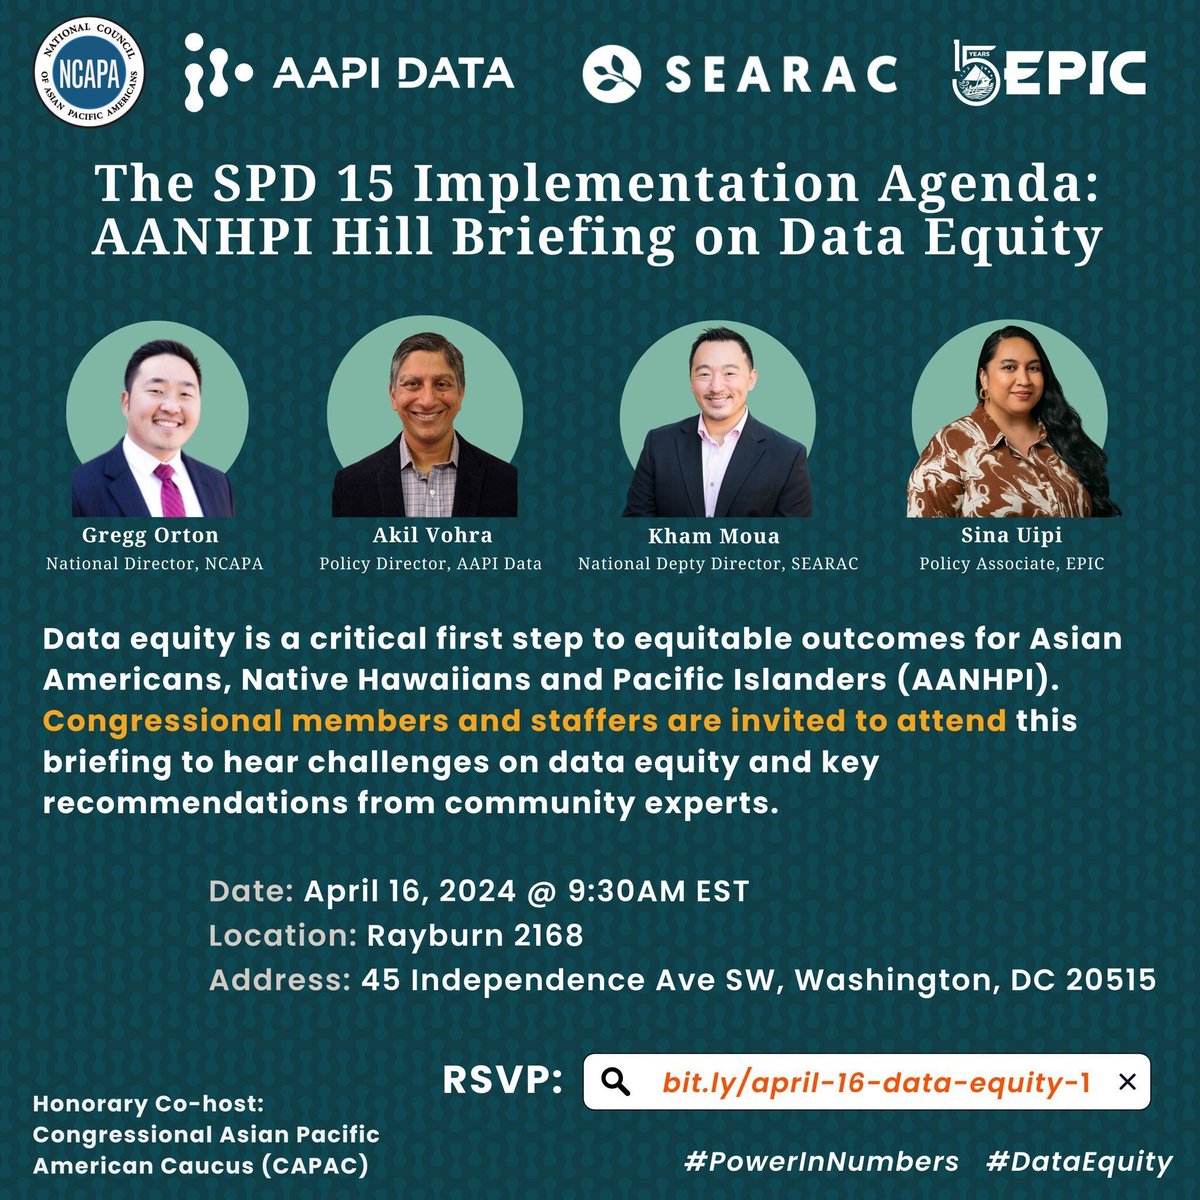 On April 16th, join us, @aapidata, @searac, & @empoweredpi in Washington, D.C. for a congressional briefing. Delve into recommendations from community experts and explore how #dataequity shapes outcomes for #AANHPI communities. Secure your spot today at: bit.ly/april-16-data-…